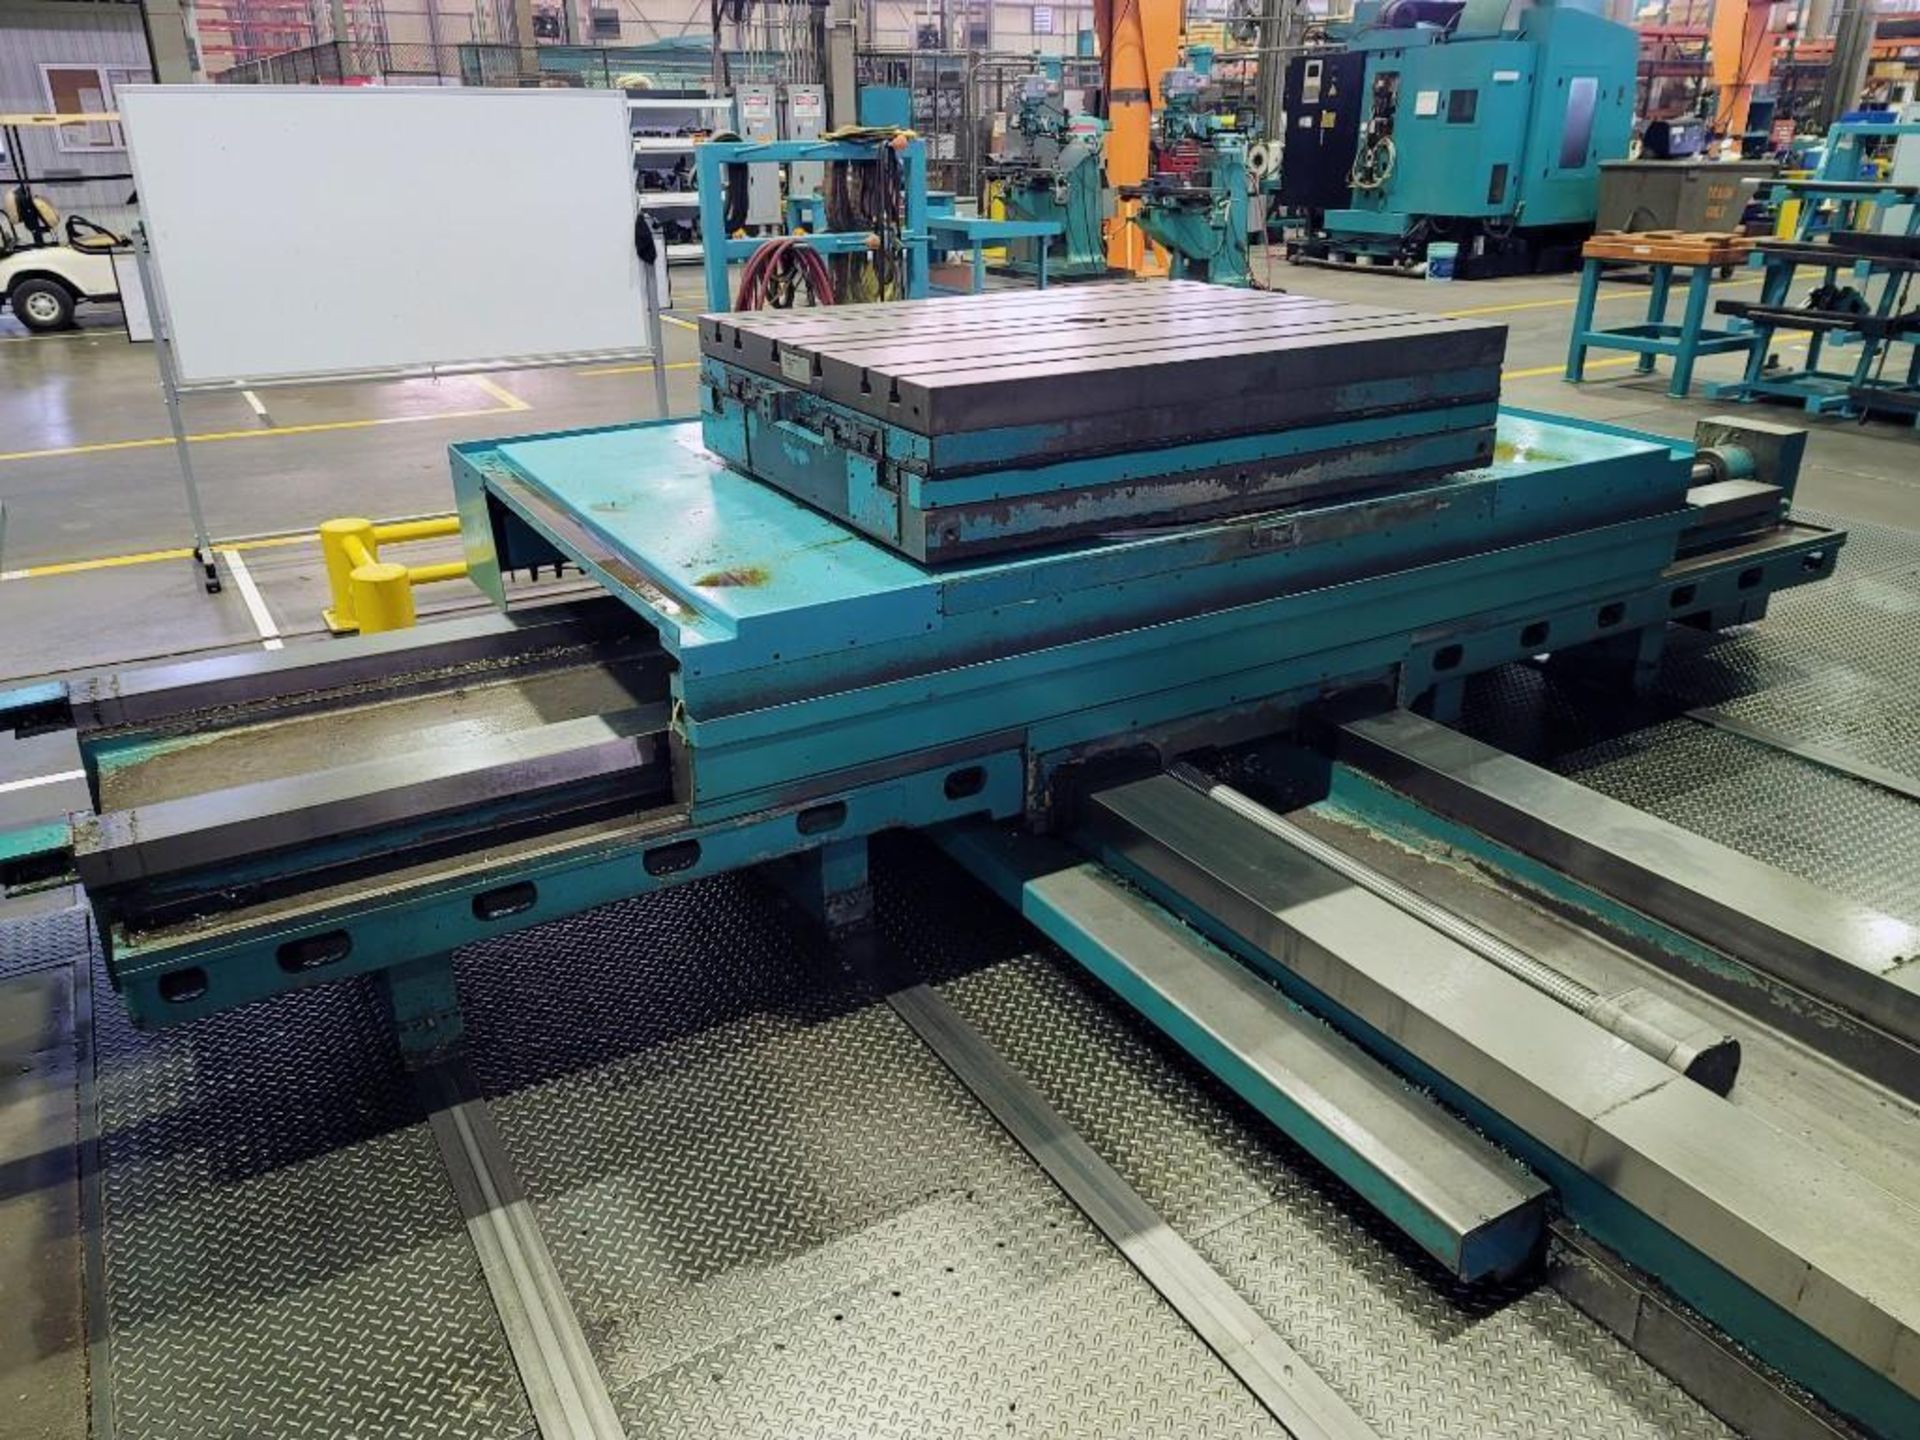 6" Giddings & Lewis CNC Horizontal Boring Mill with 48" x 60" Twin Pallets - Image 6 of 14